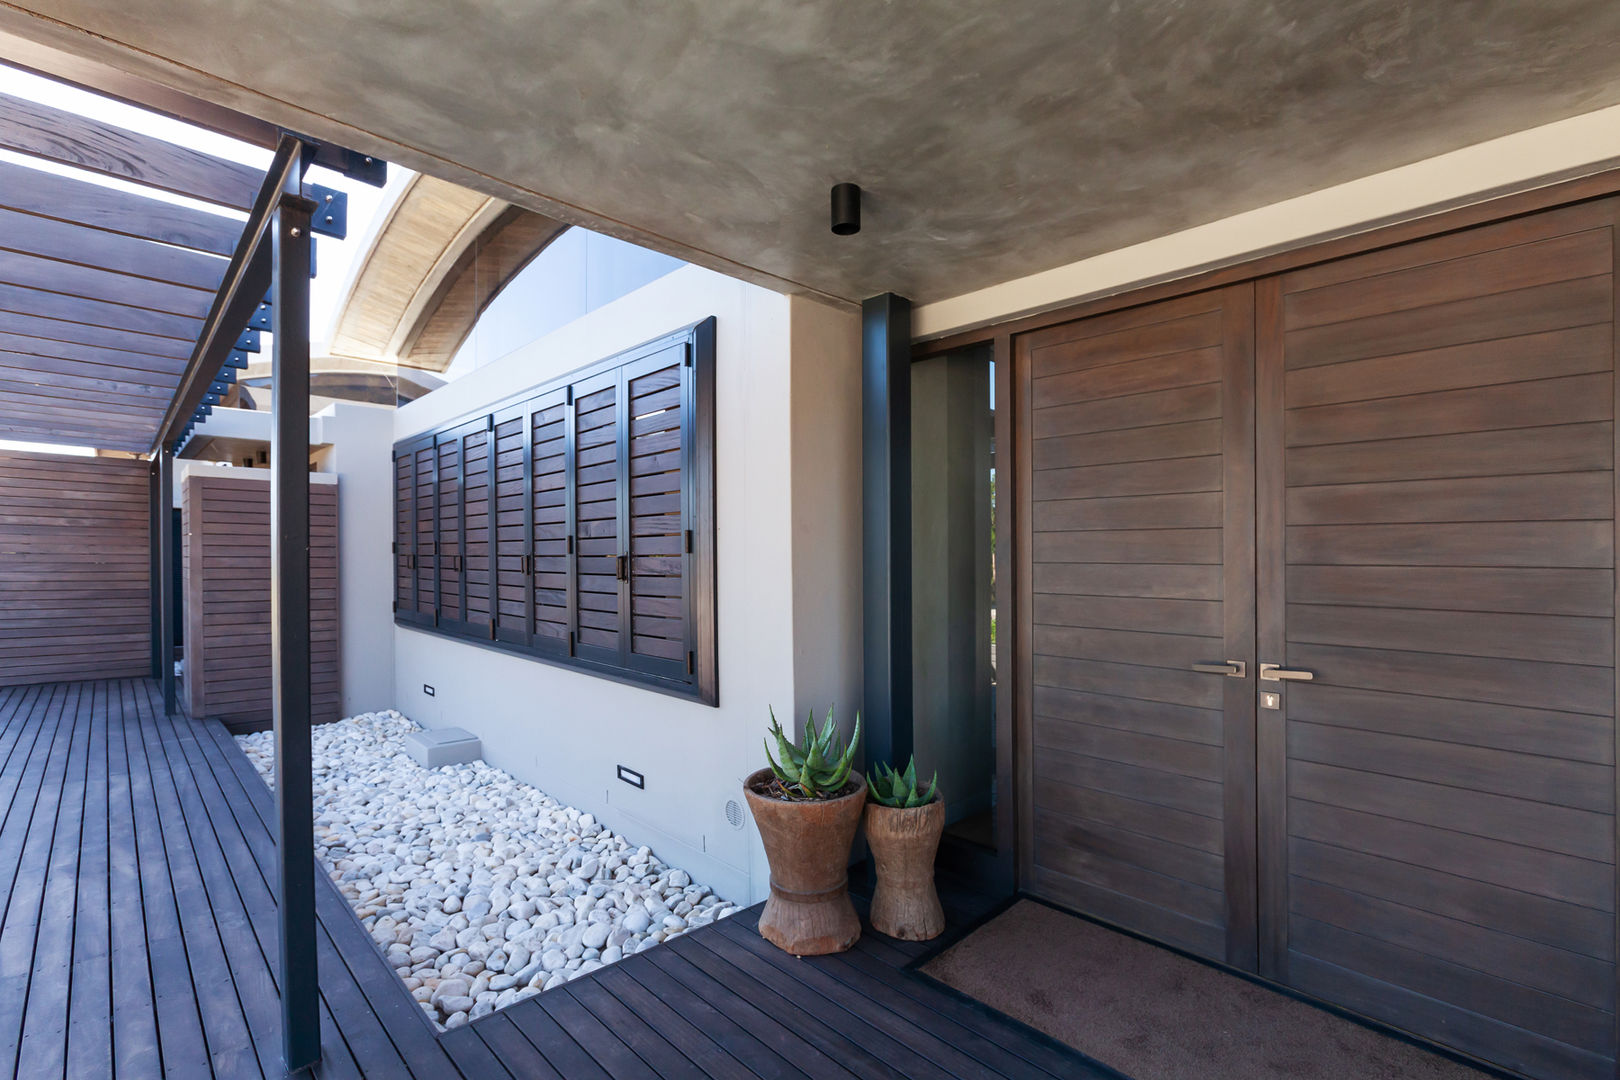 Lodge Prevoli, Stanford, Cape Town - Entrance House of Supreme CPT Modern houses Wood Wood effect Wooden Shutters, Wood Shutters, Patio Shutters